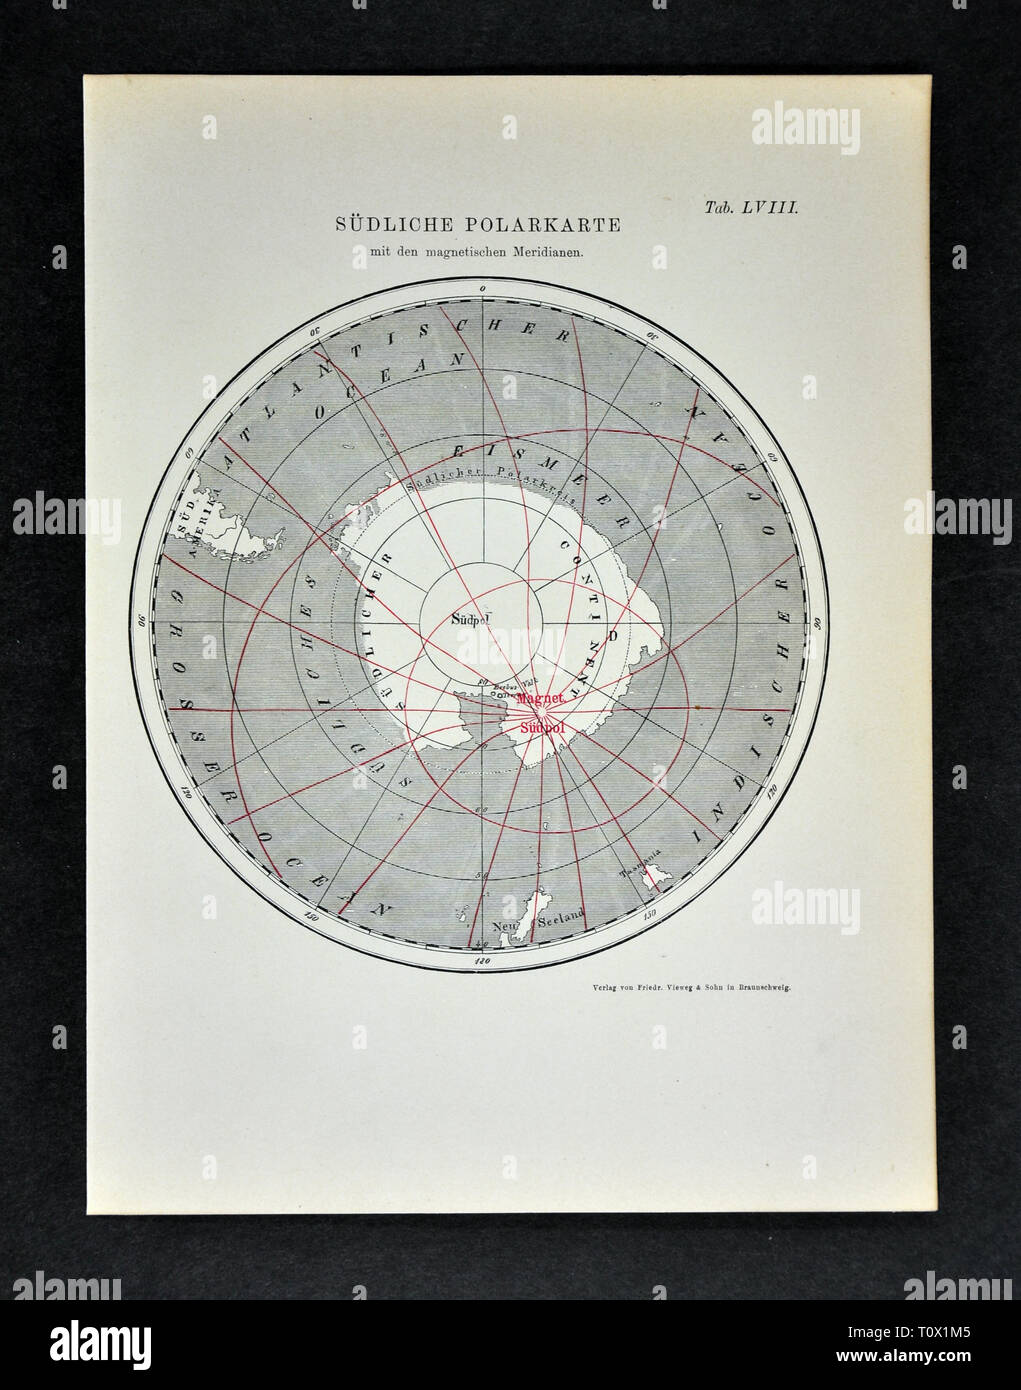 1894 Muller Map of Antarctica showing the South Pole Magnetic Meridians Stock Photo